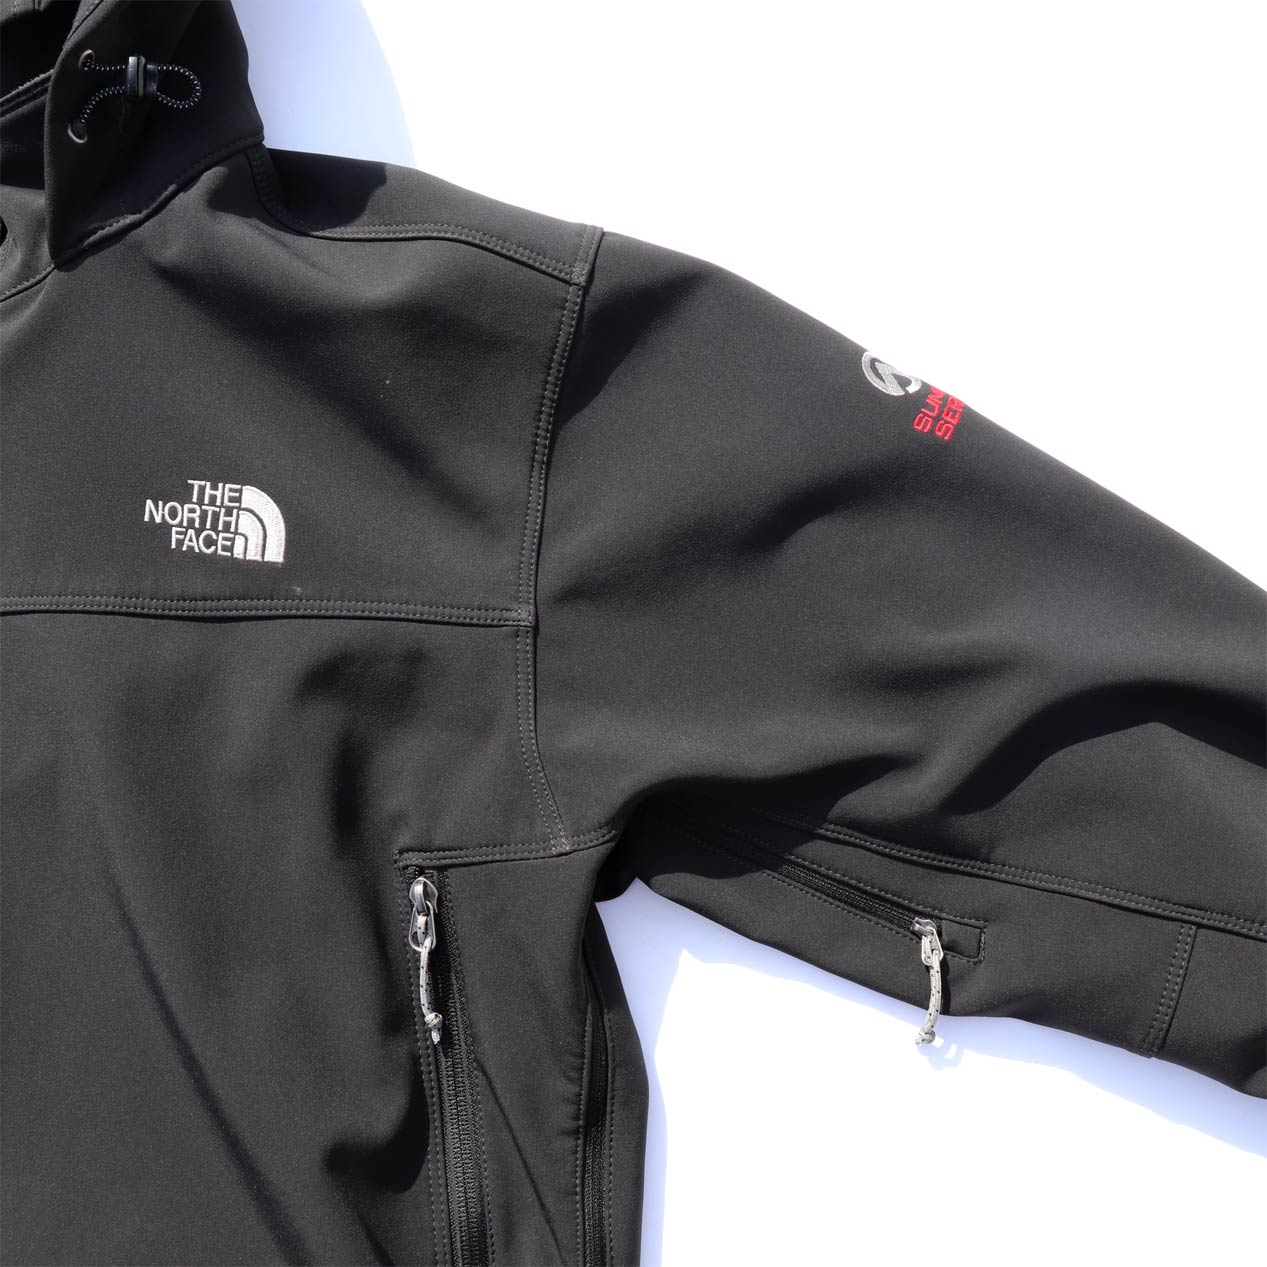 POST JUNK / 00's THE NORTH FACE SUMMIT SERIES APEX ソフトシェル 